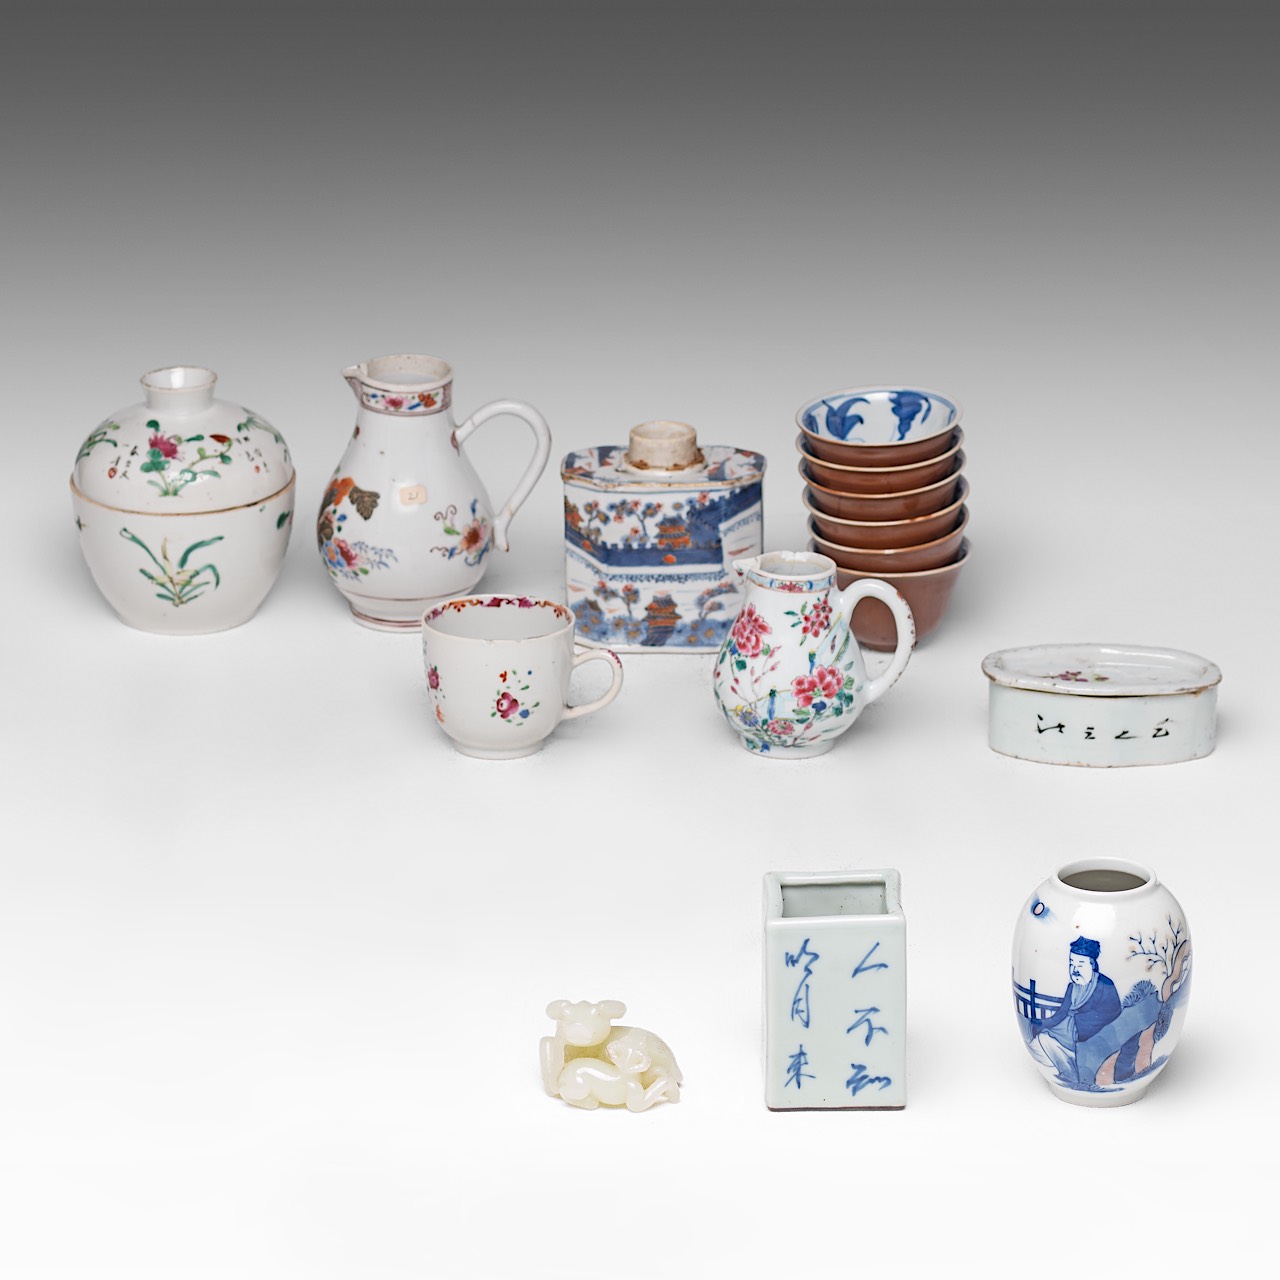 A collection of four Chinese scholar's objects, incl. a brush pot with inscriptions, late 18thC - ad